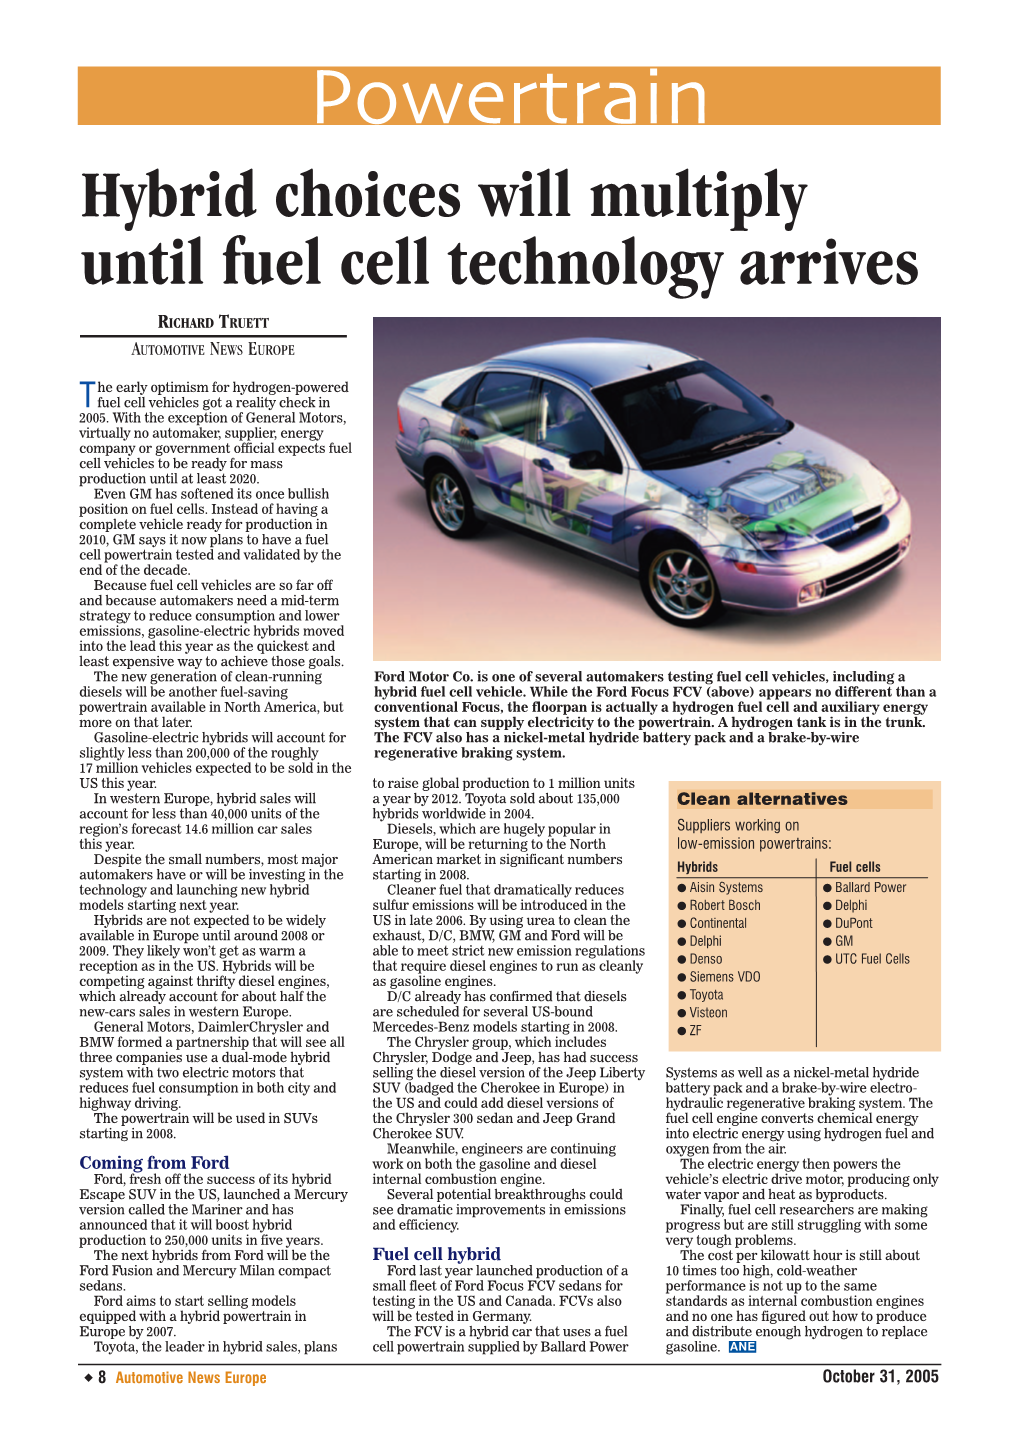 Powertrain Hybrid Choices Will Multiply Until Fuel Cell Technology Arrives